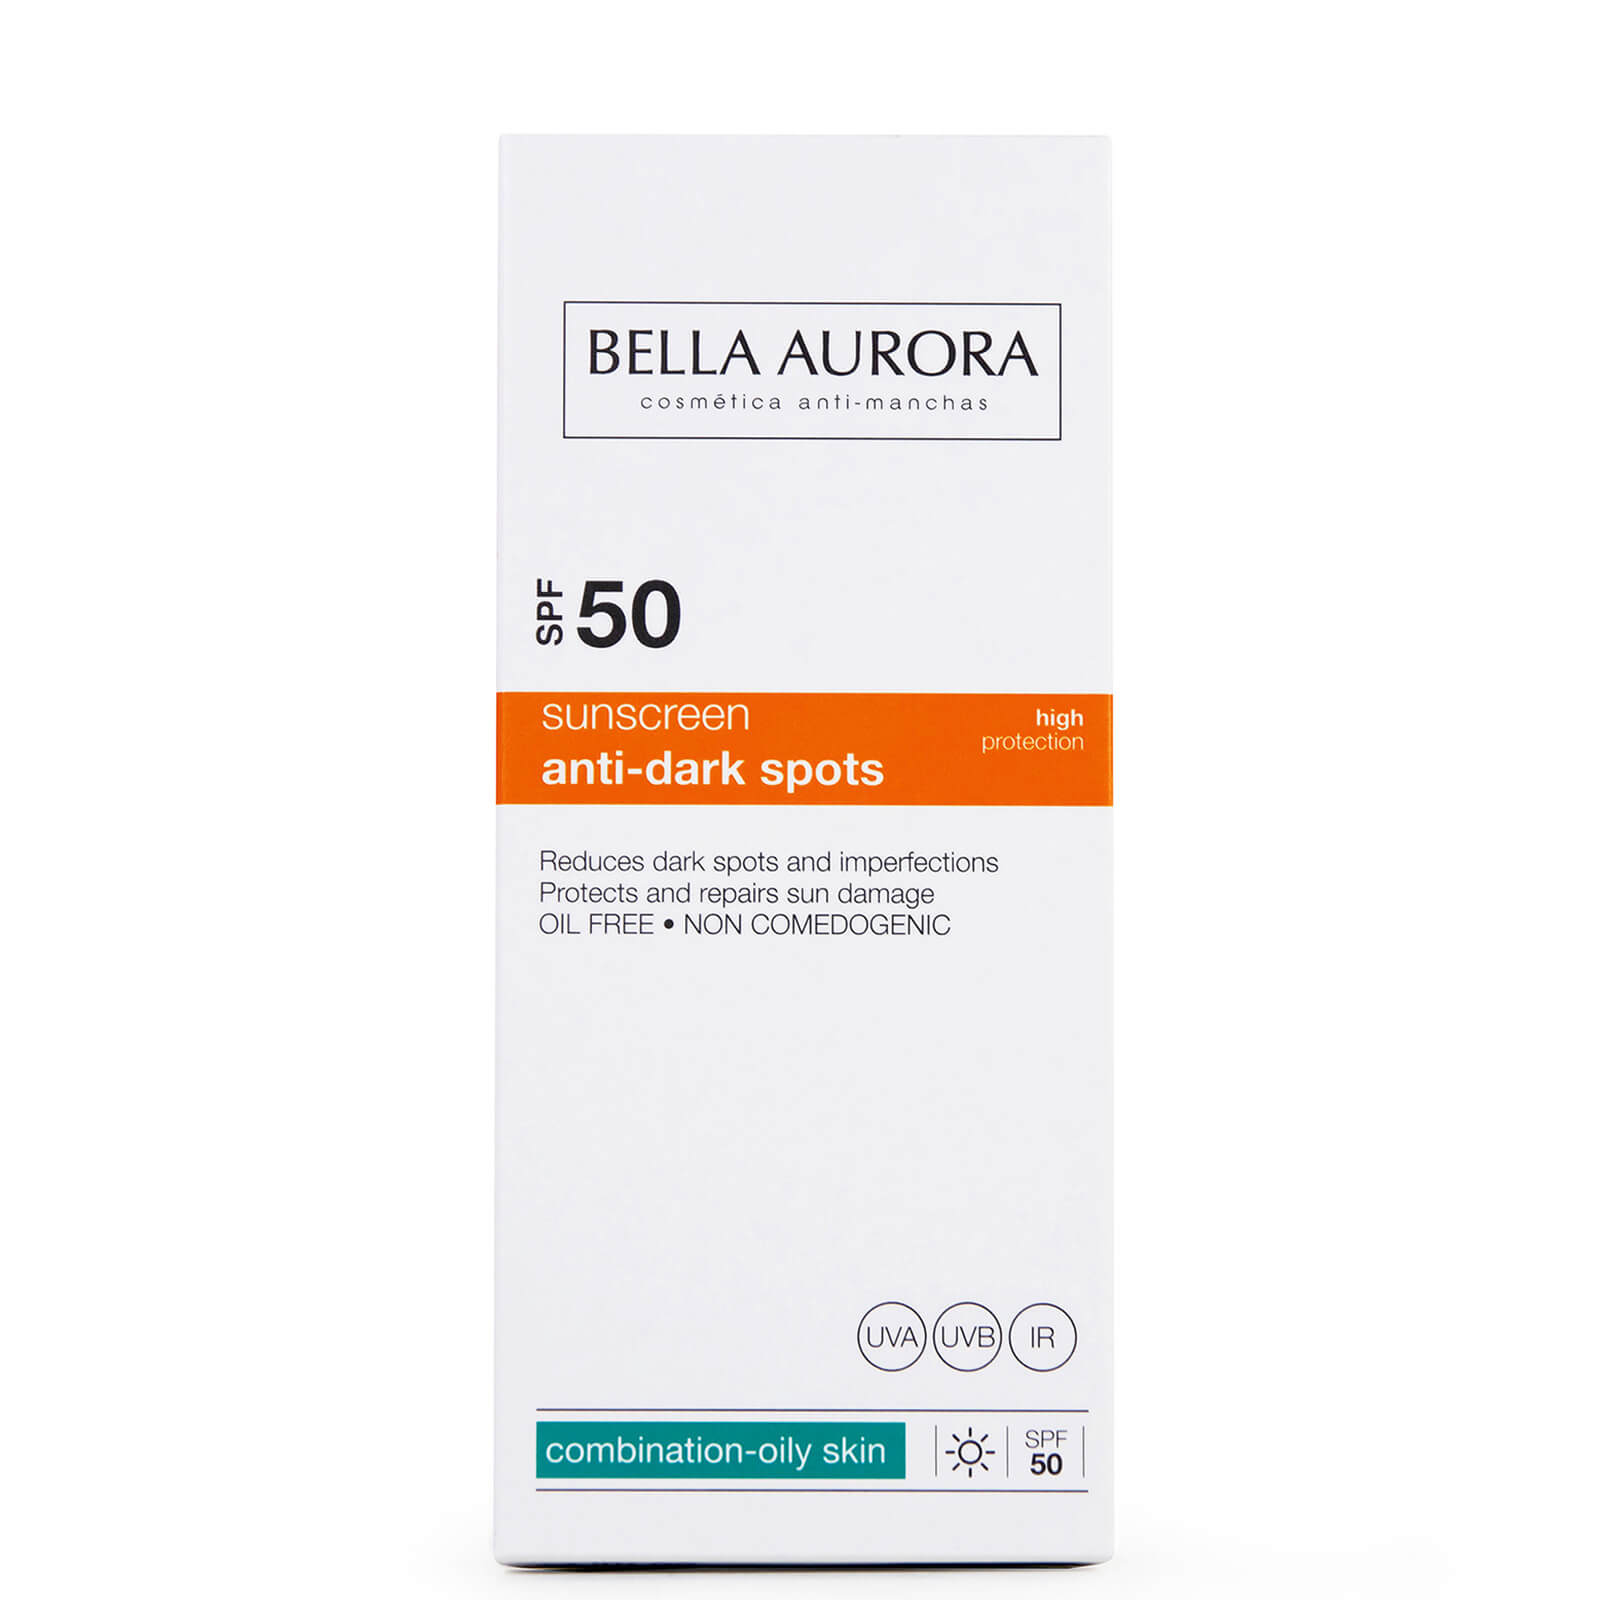 Artikel klicken und genauer betrachten! - Shield your complexion from the accelerated ageing effects of UV exposure with powerful daily sunblock. Bella Aurora’s Anti-Dark Spots Gel-Cream Sunscreen SPF50+ provides broad-spectrum UVA, UVB and IR protection with microencapsulated filters and a double sphere system, while its lightweight, oil-free formula makes it ideal for combination to oily skin types. | im Online Shop kaufen